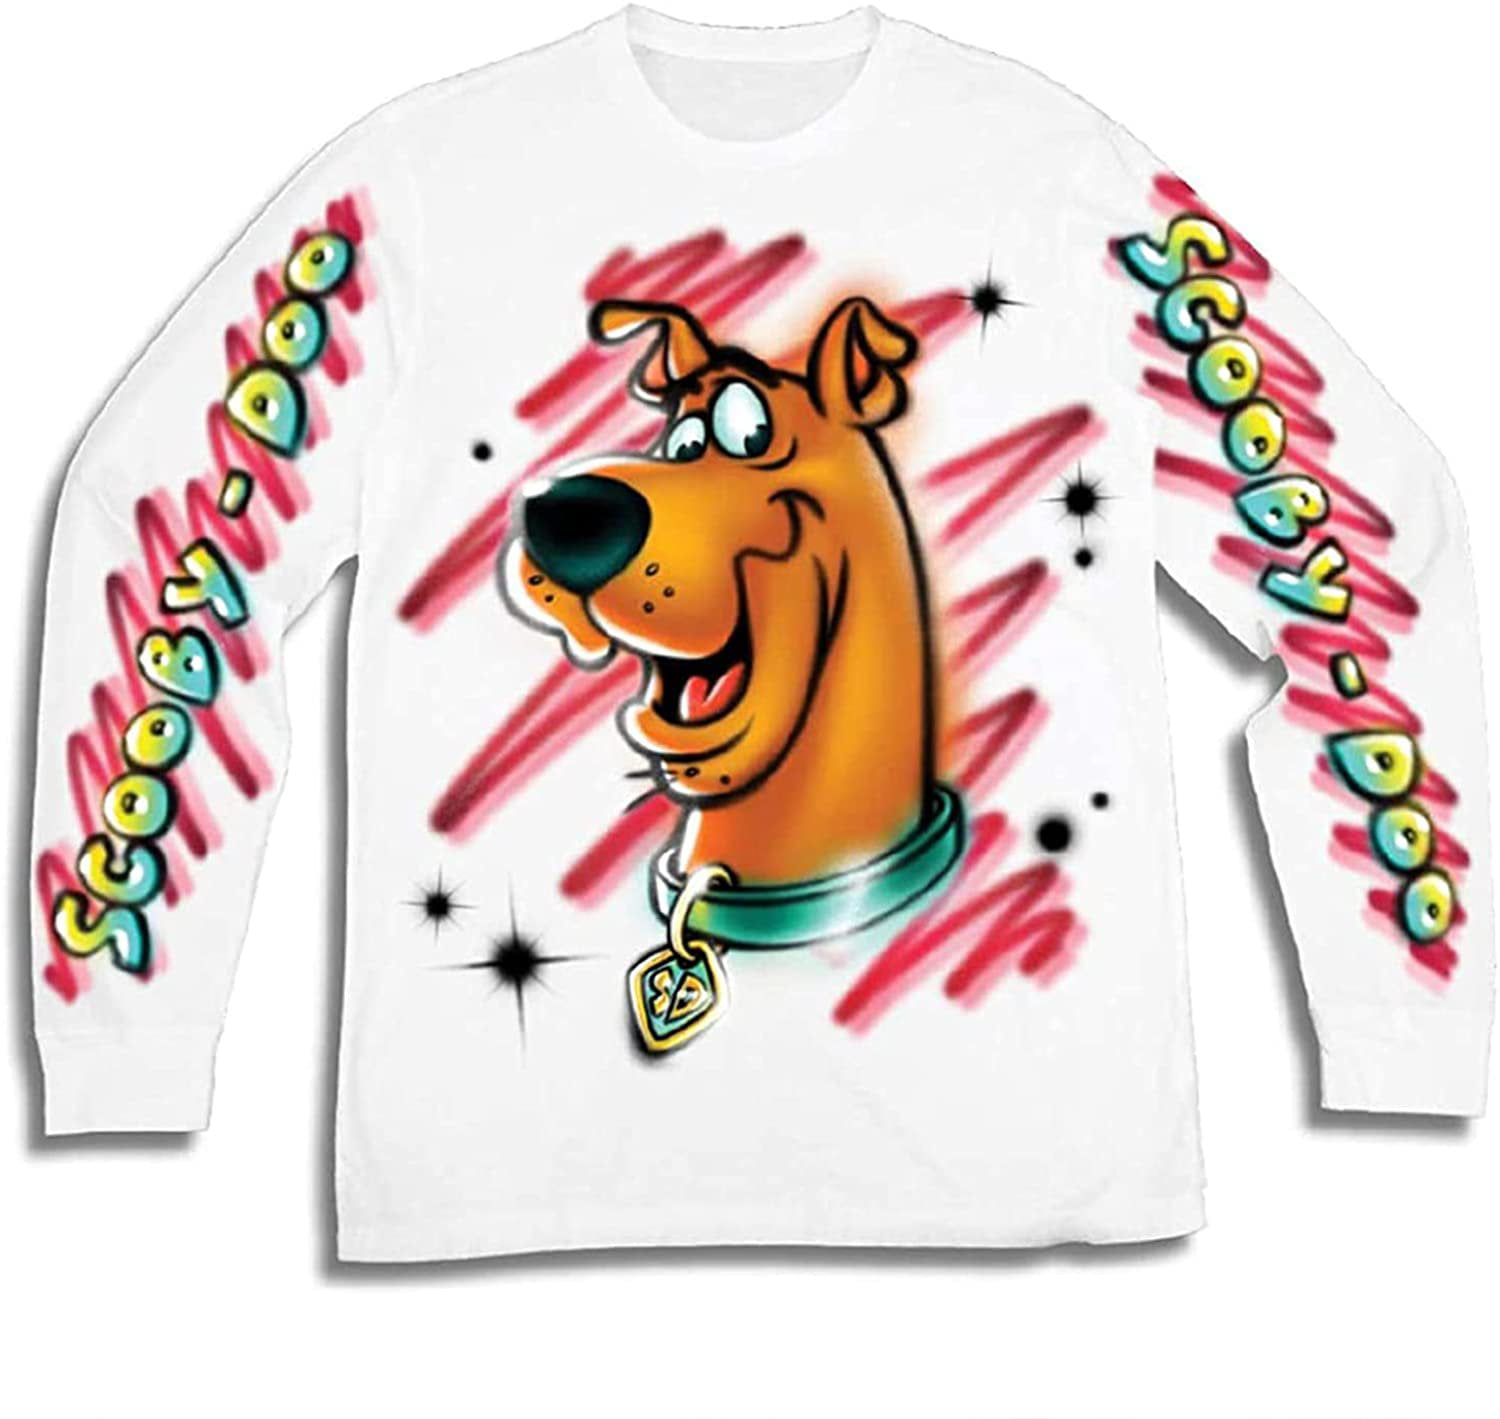 SCOOBY DOO AND VAN LONG SLEEVES T SHIRT Black All Size 